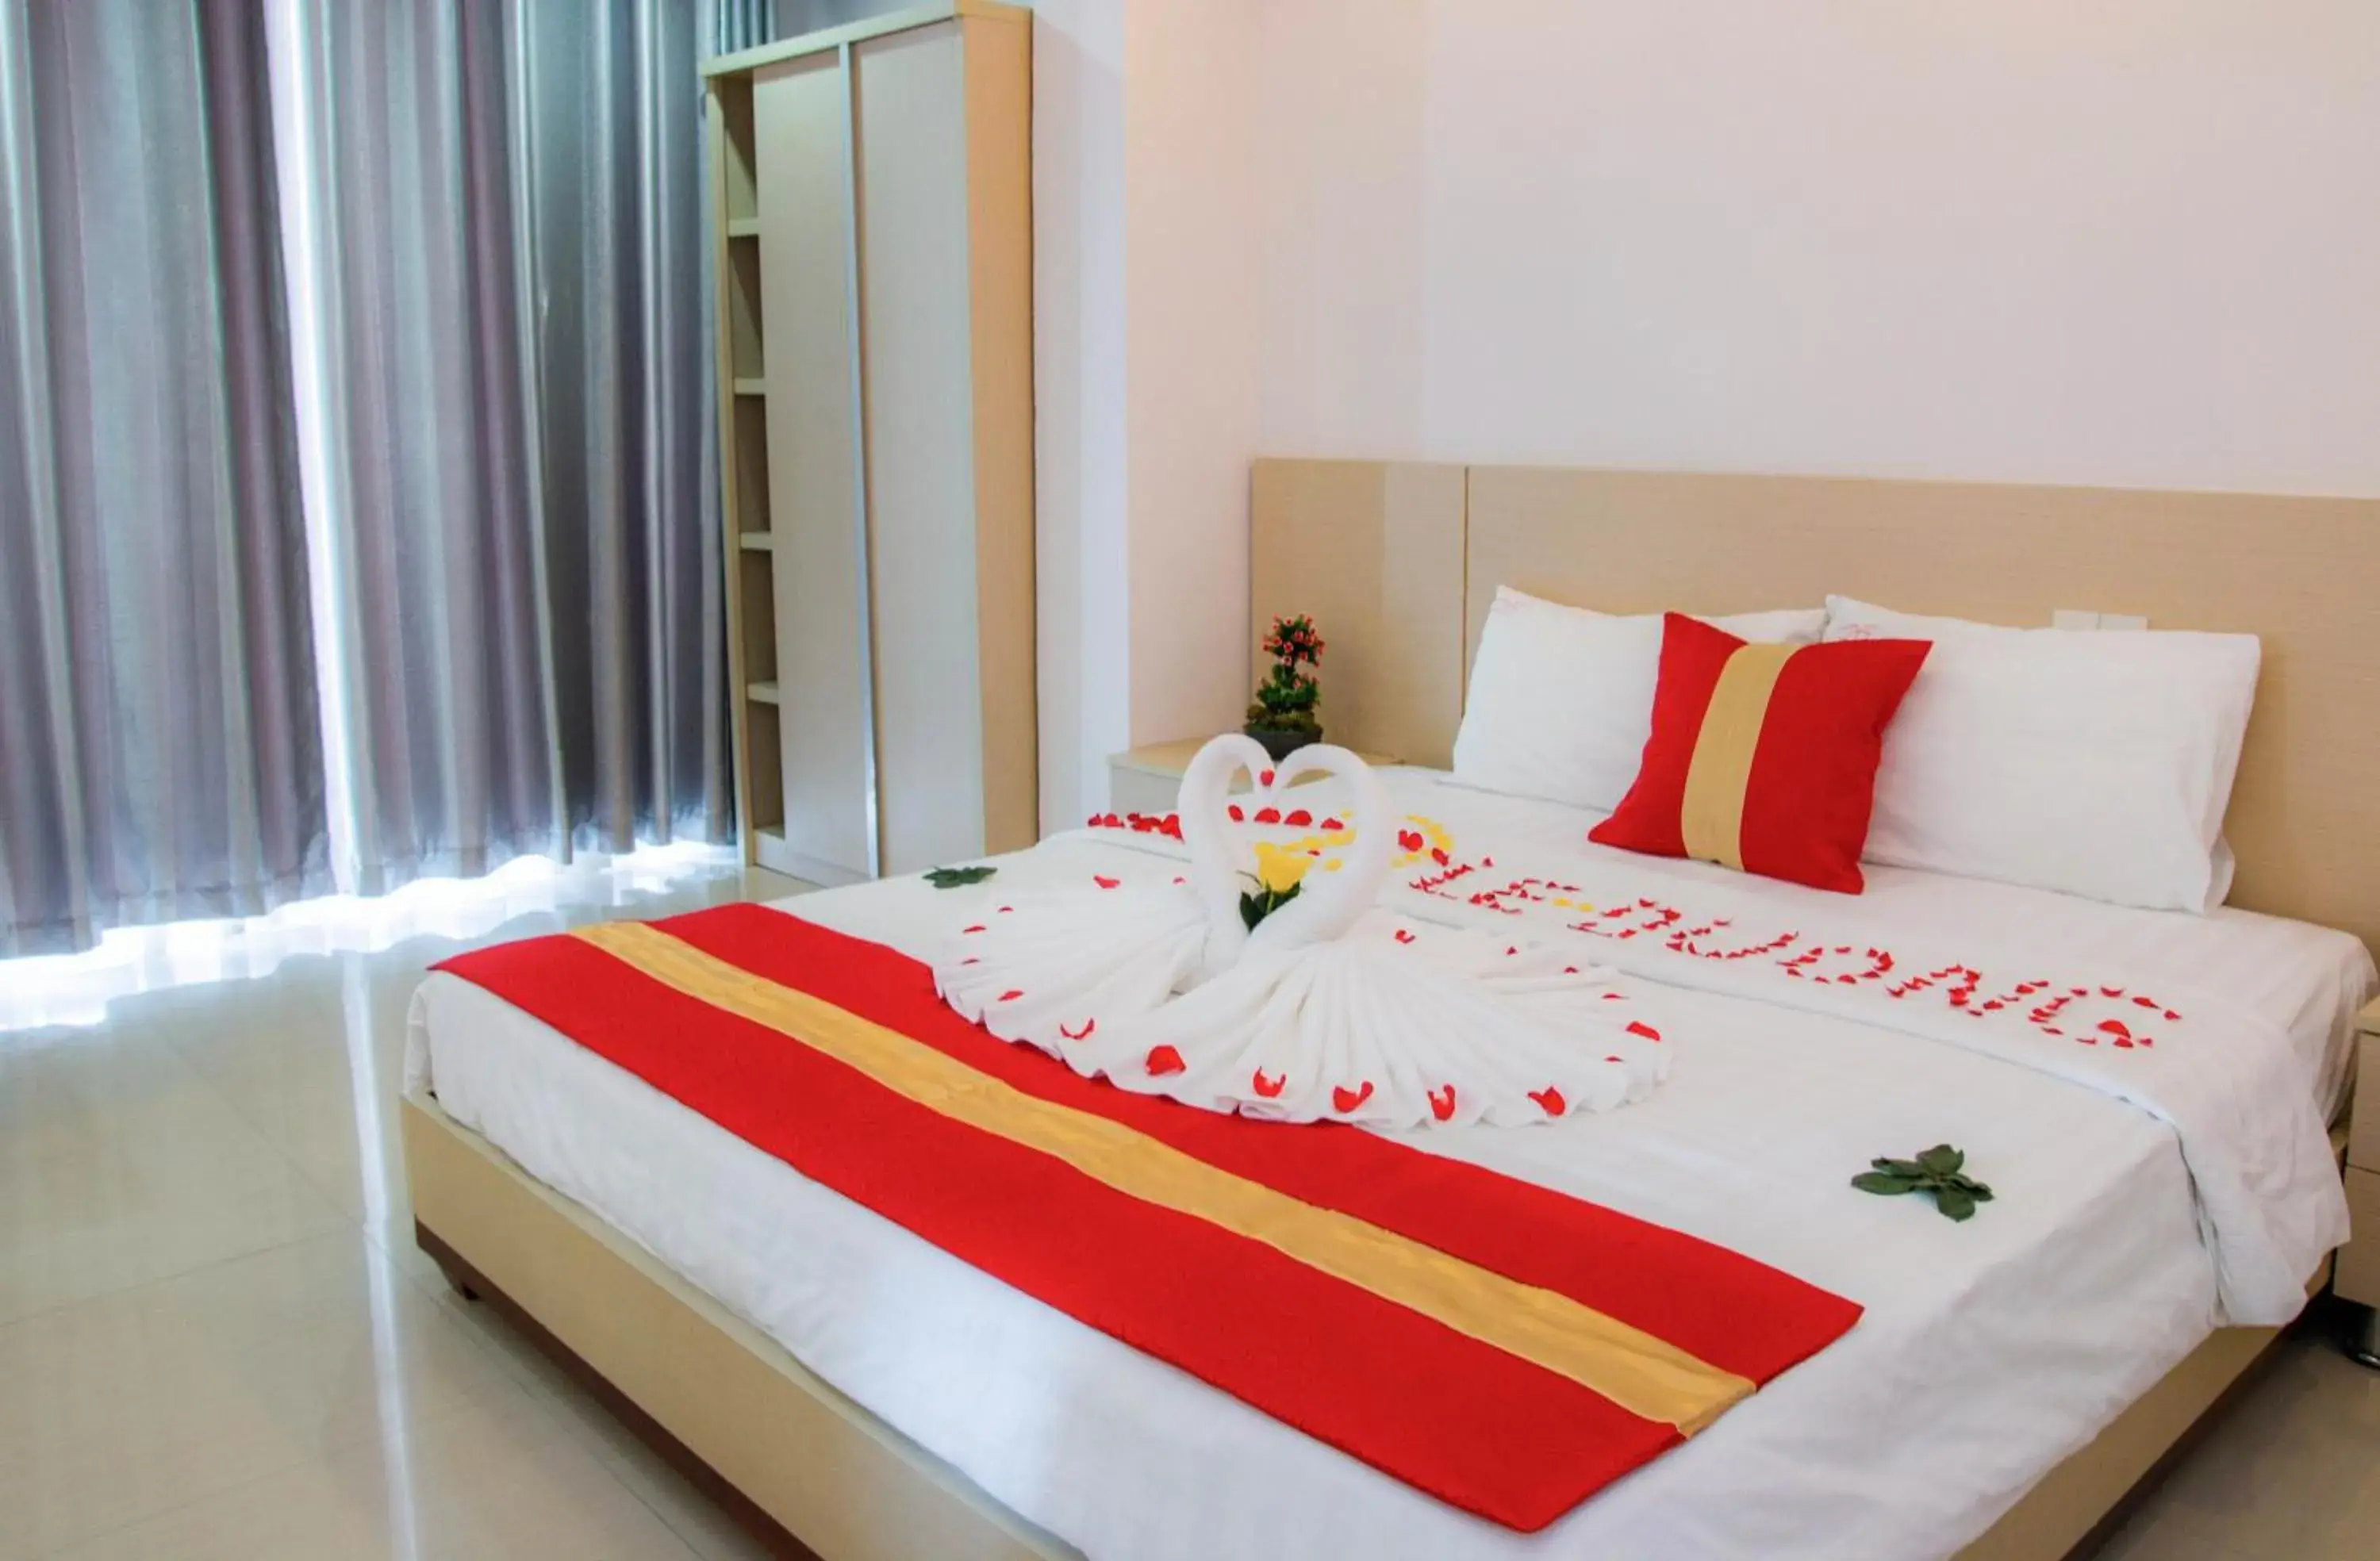 Bed in Le Duong Hotel